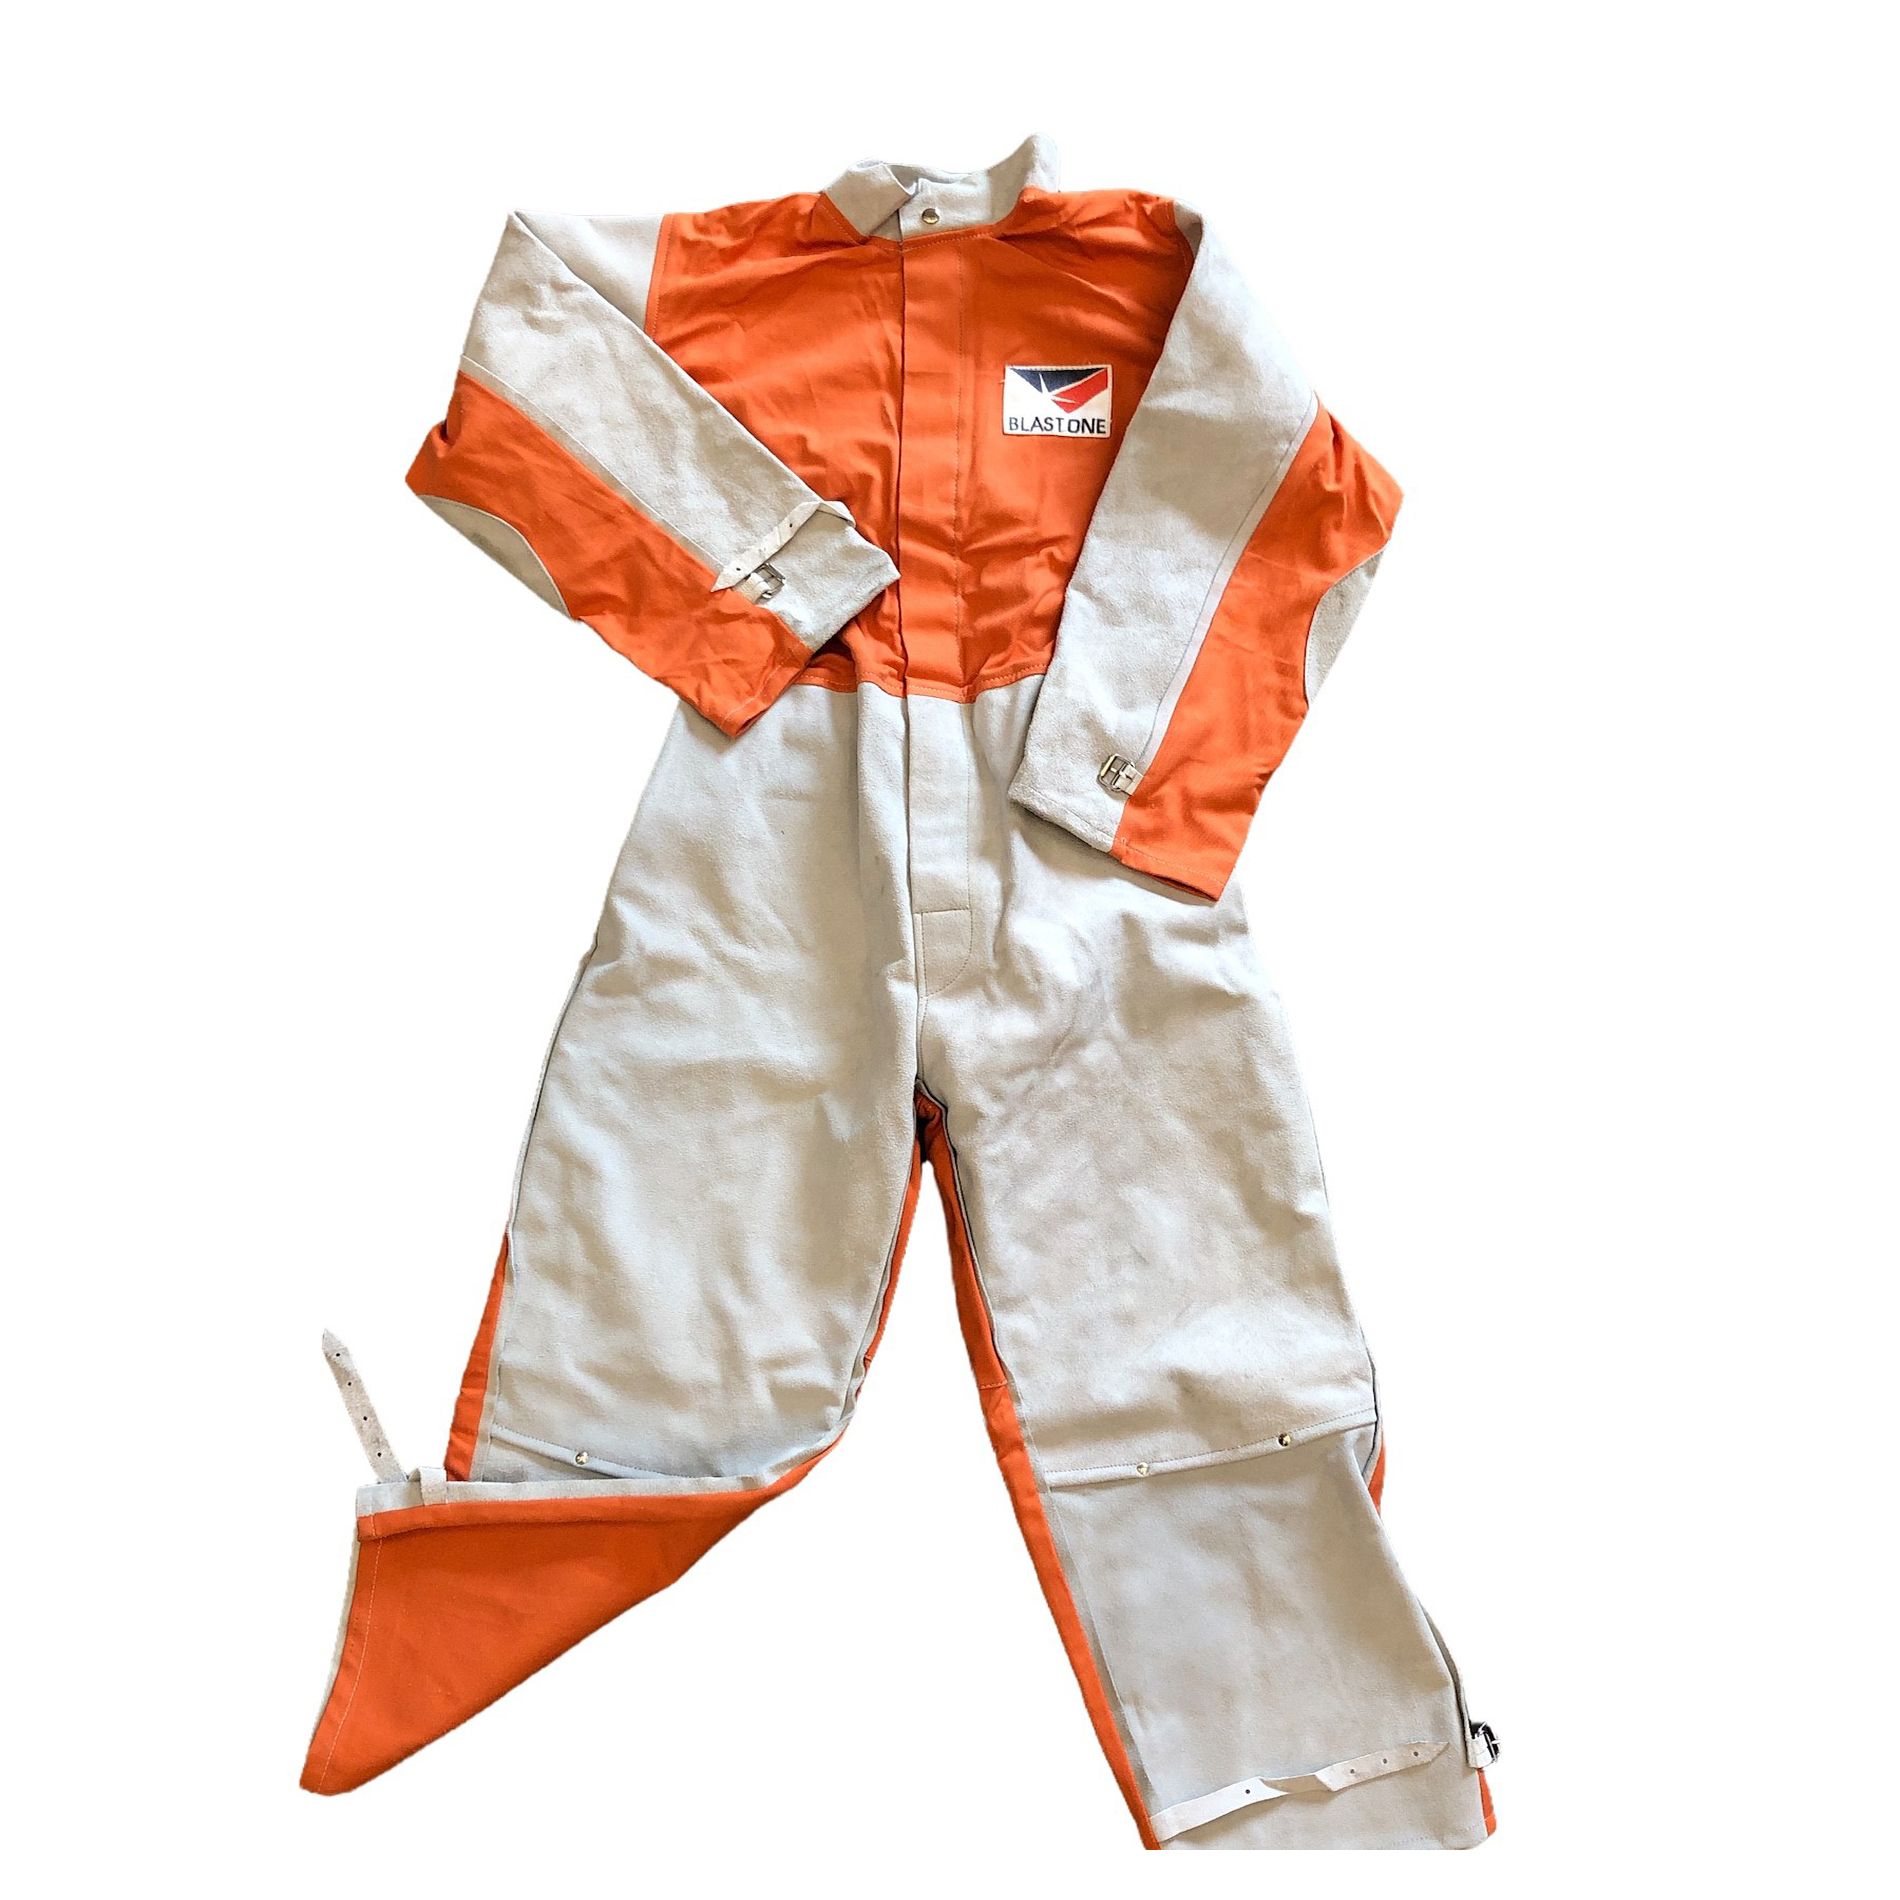 LEATHER FRONTED SANDBLASTING SUIT COVERALLS